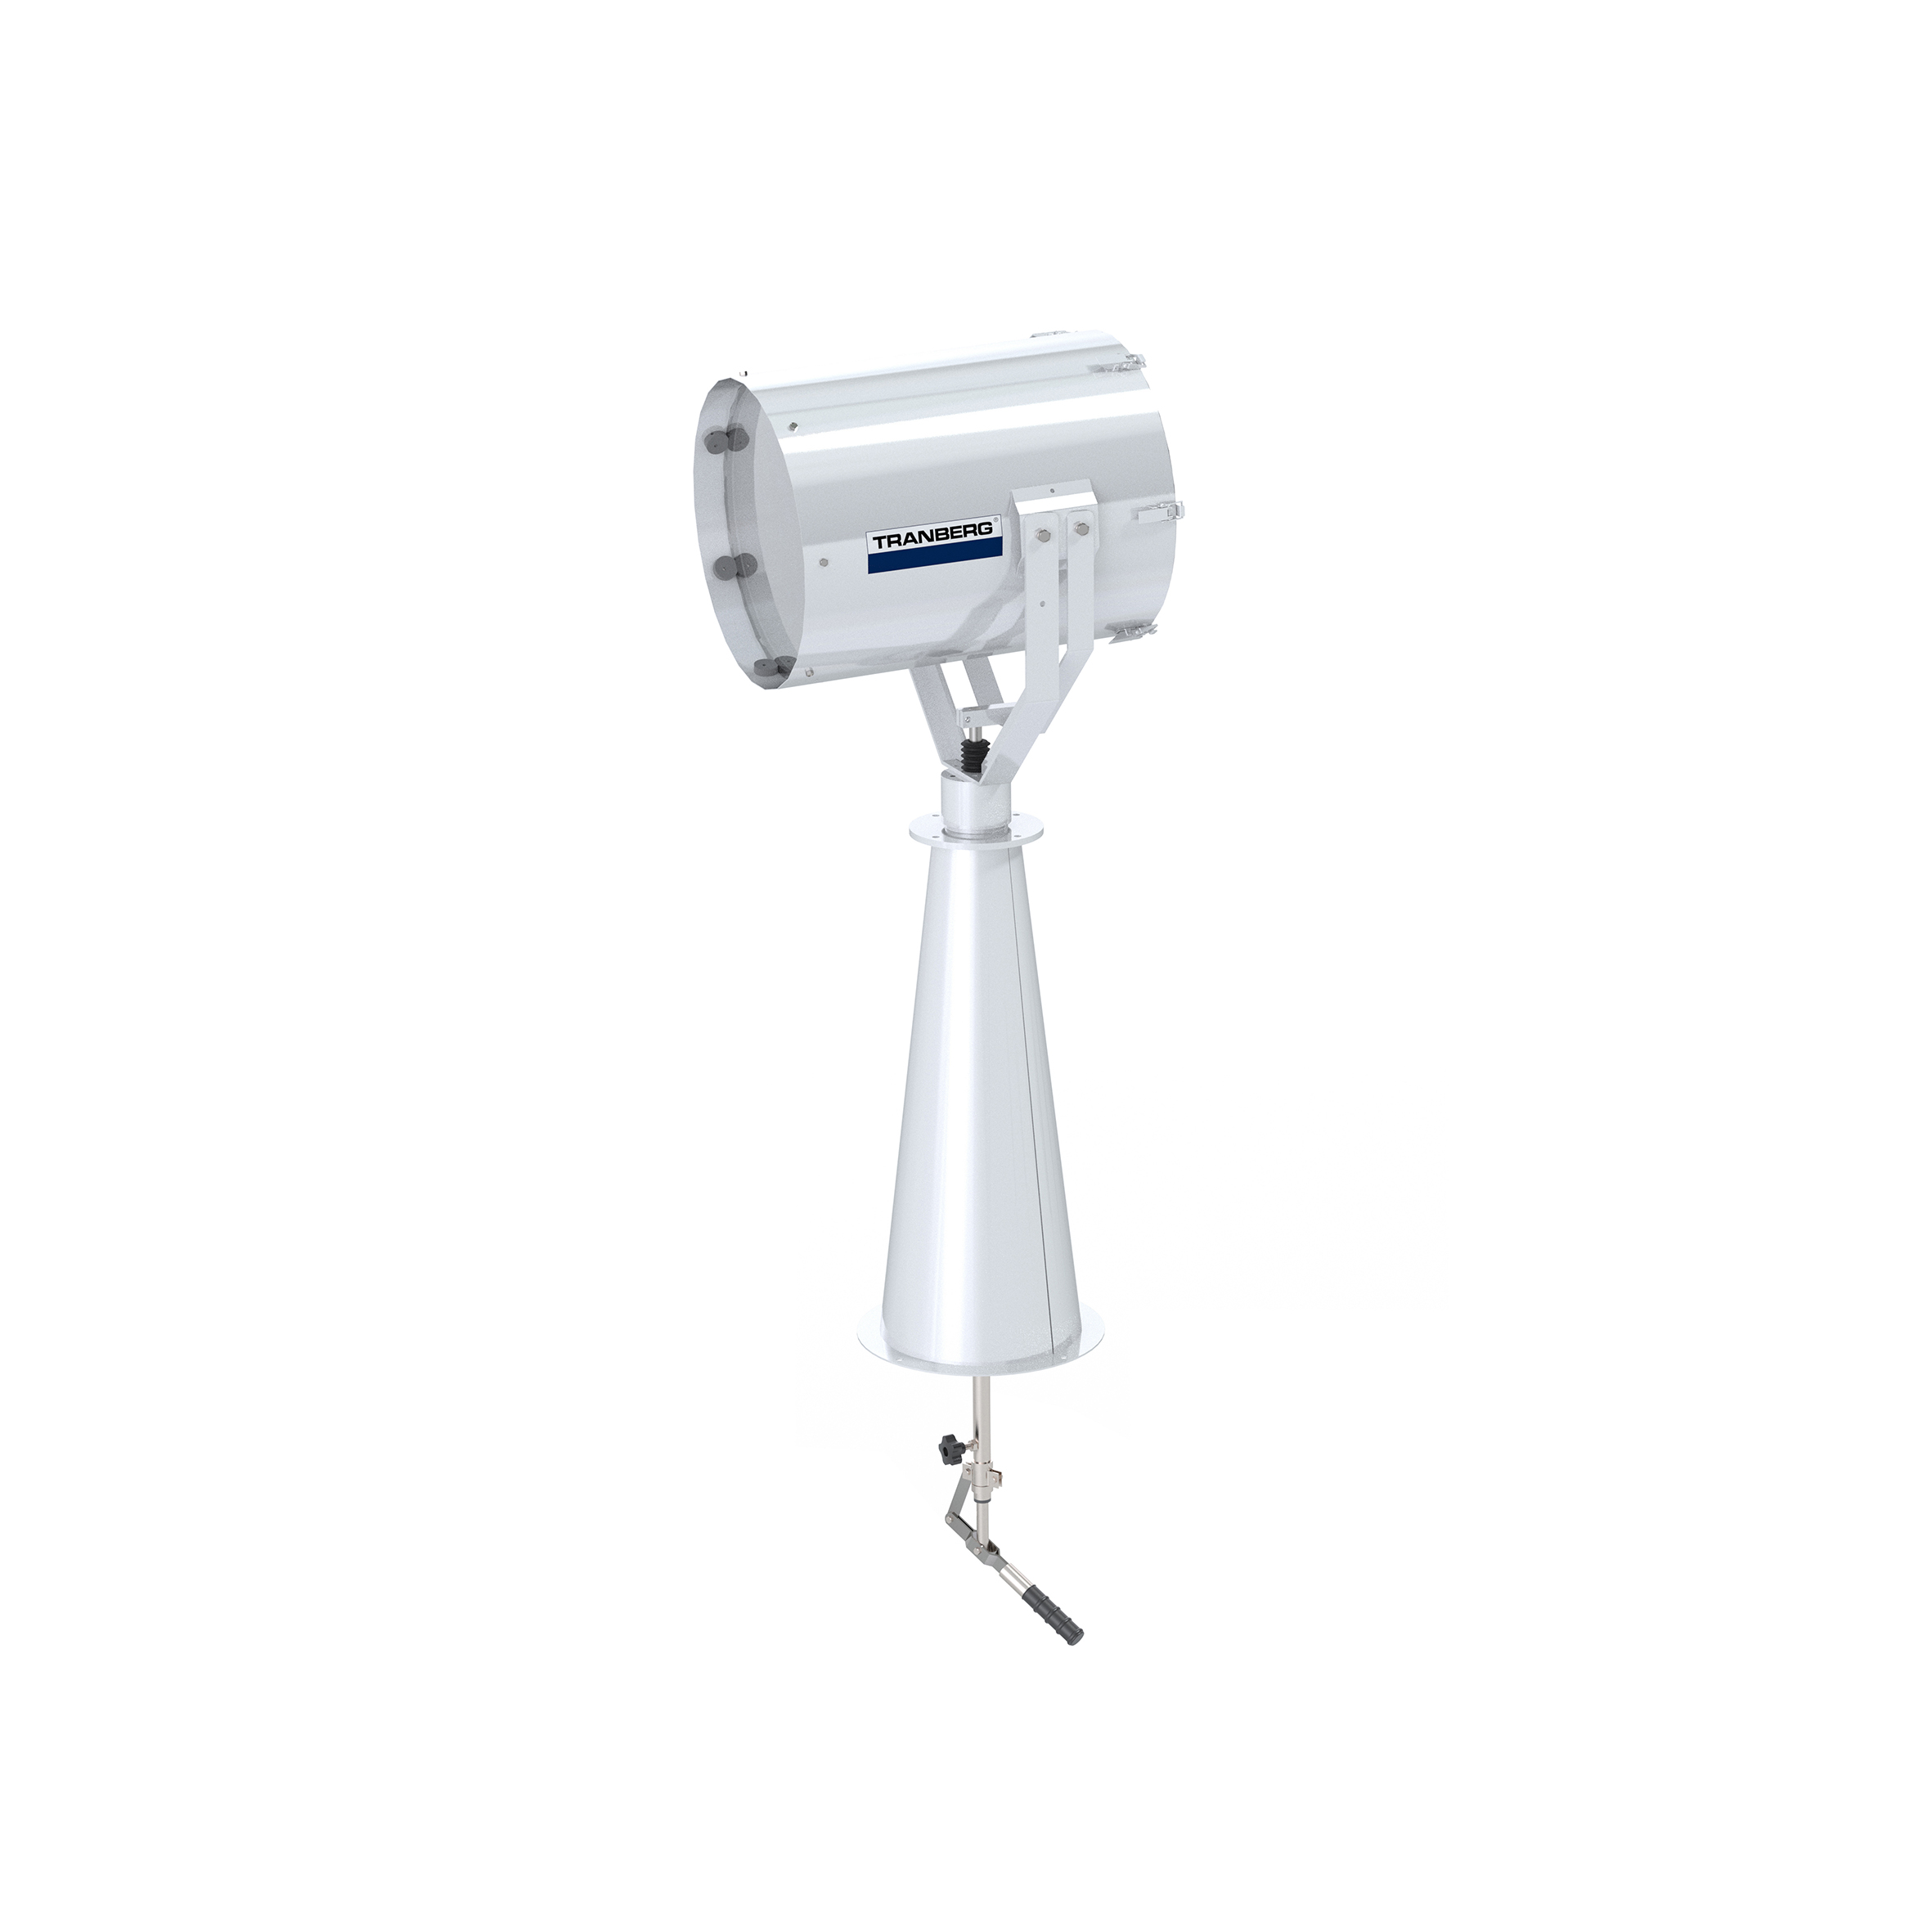 TEF 2630 Searchlight: Halogen 2000W bulb incl, 230V, Bridge Controlled, Stainless Steel, W/300 mm pe